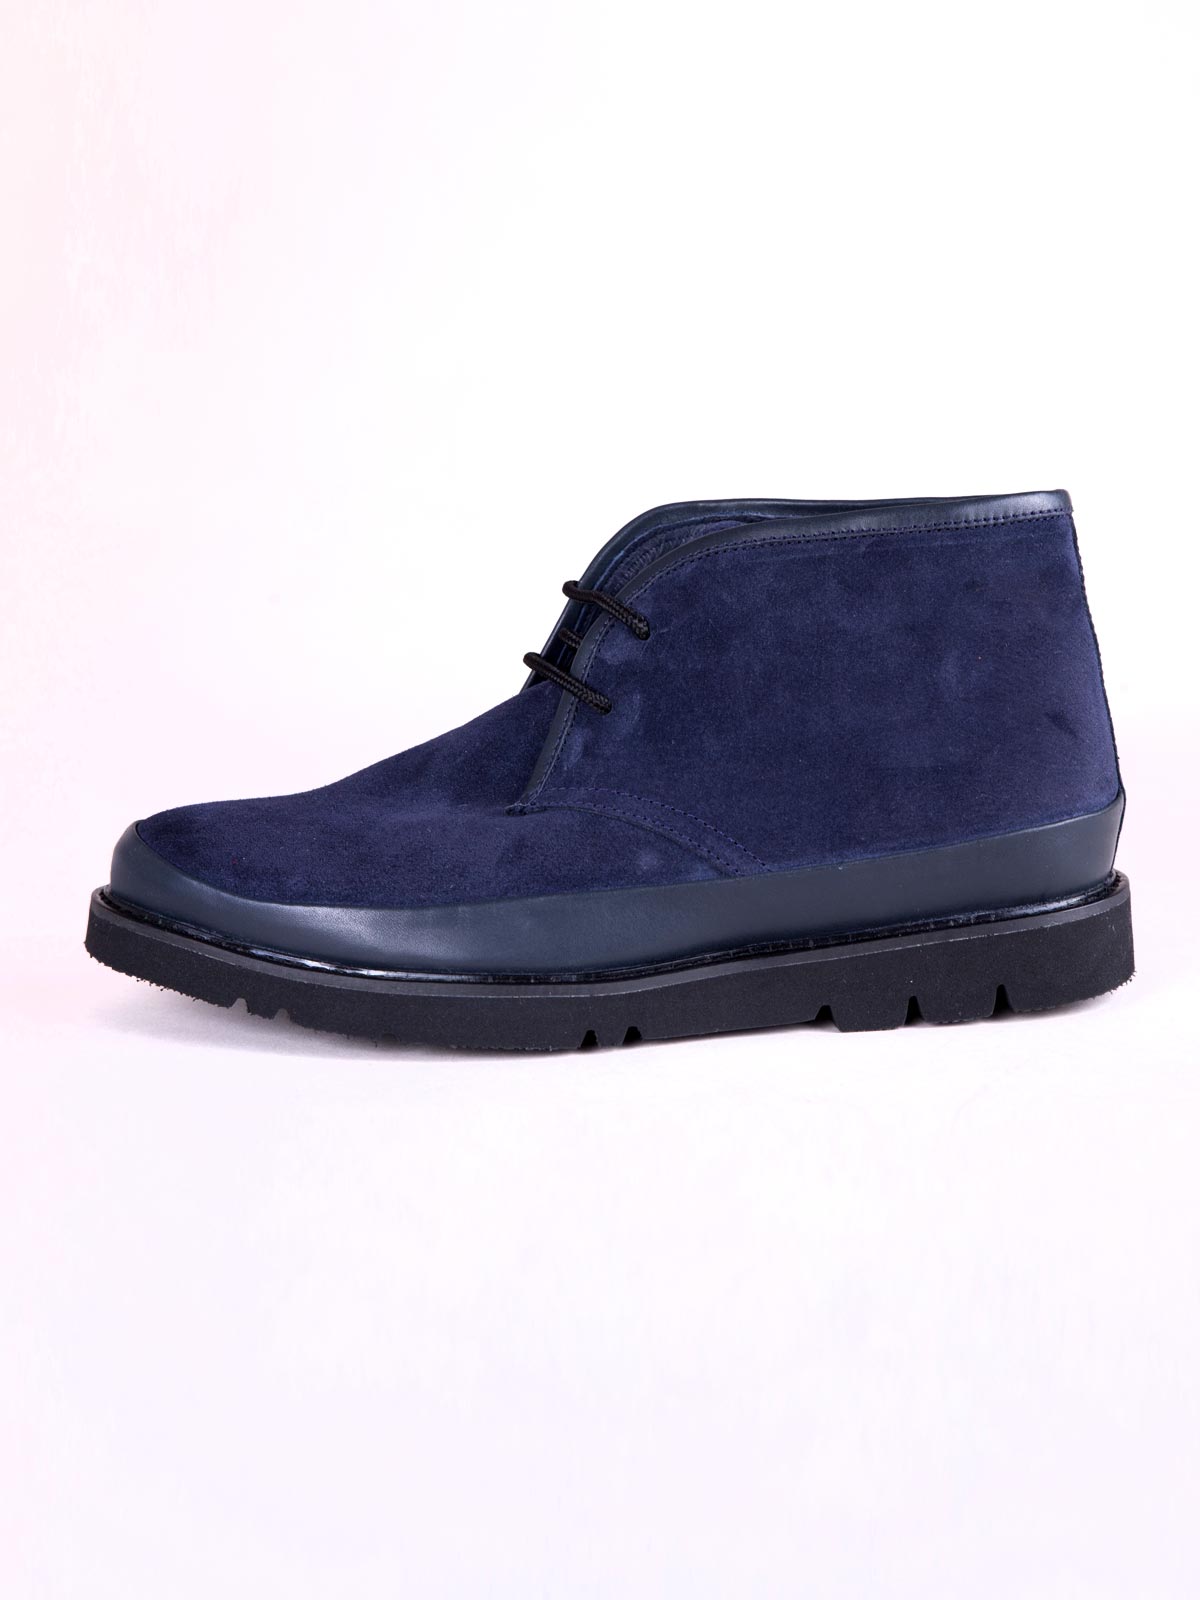 Suede boots - 81064 - € 41.62 img2